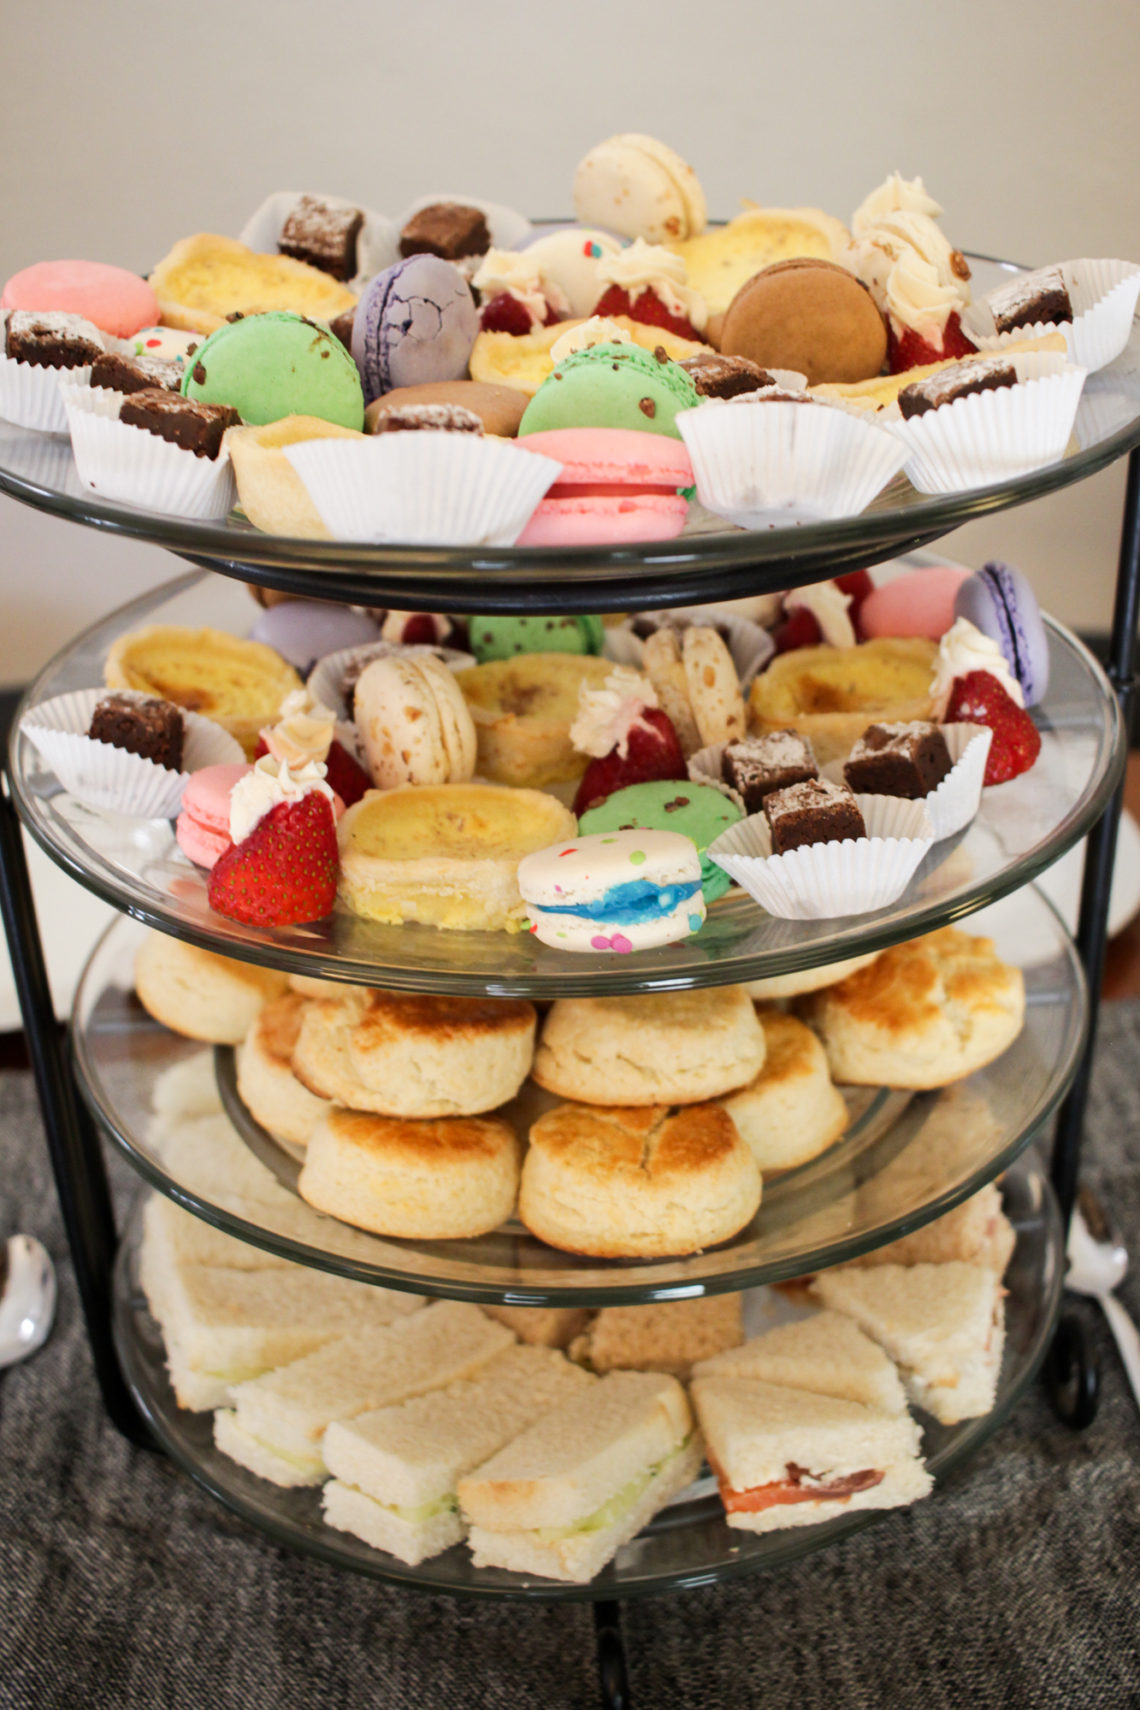 How to host the perfect afternoon tea: Image of a 4-tiered server with sandwiches, scones, and desserts.